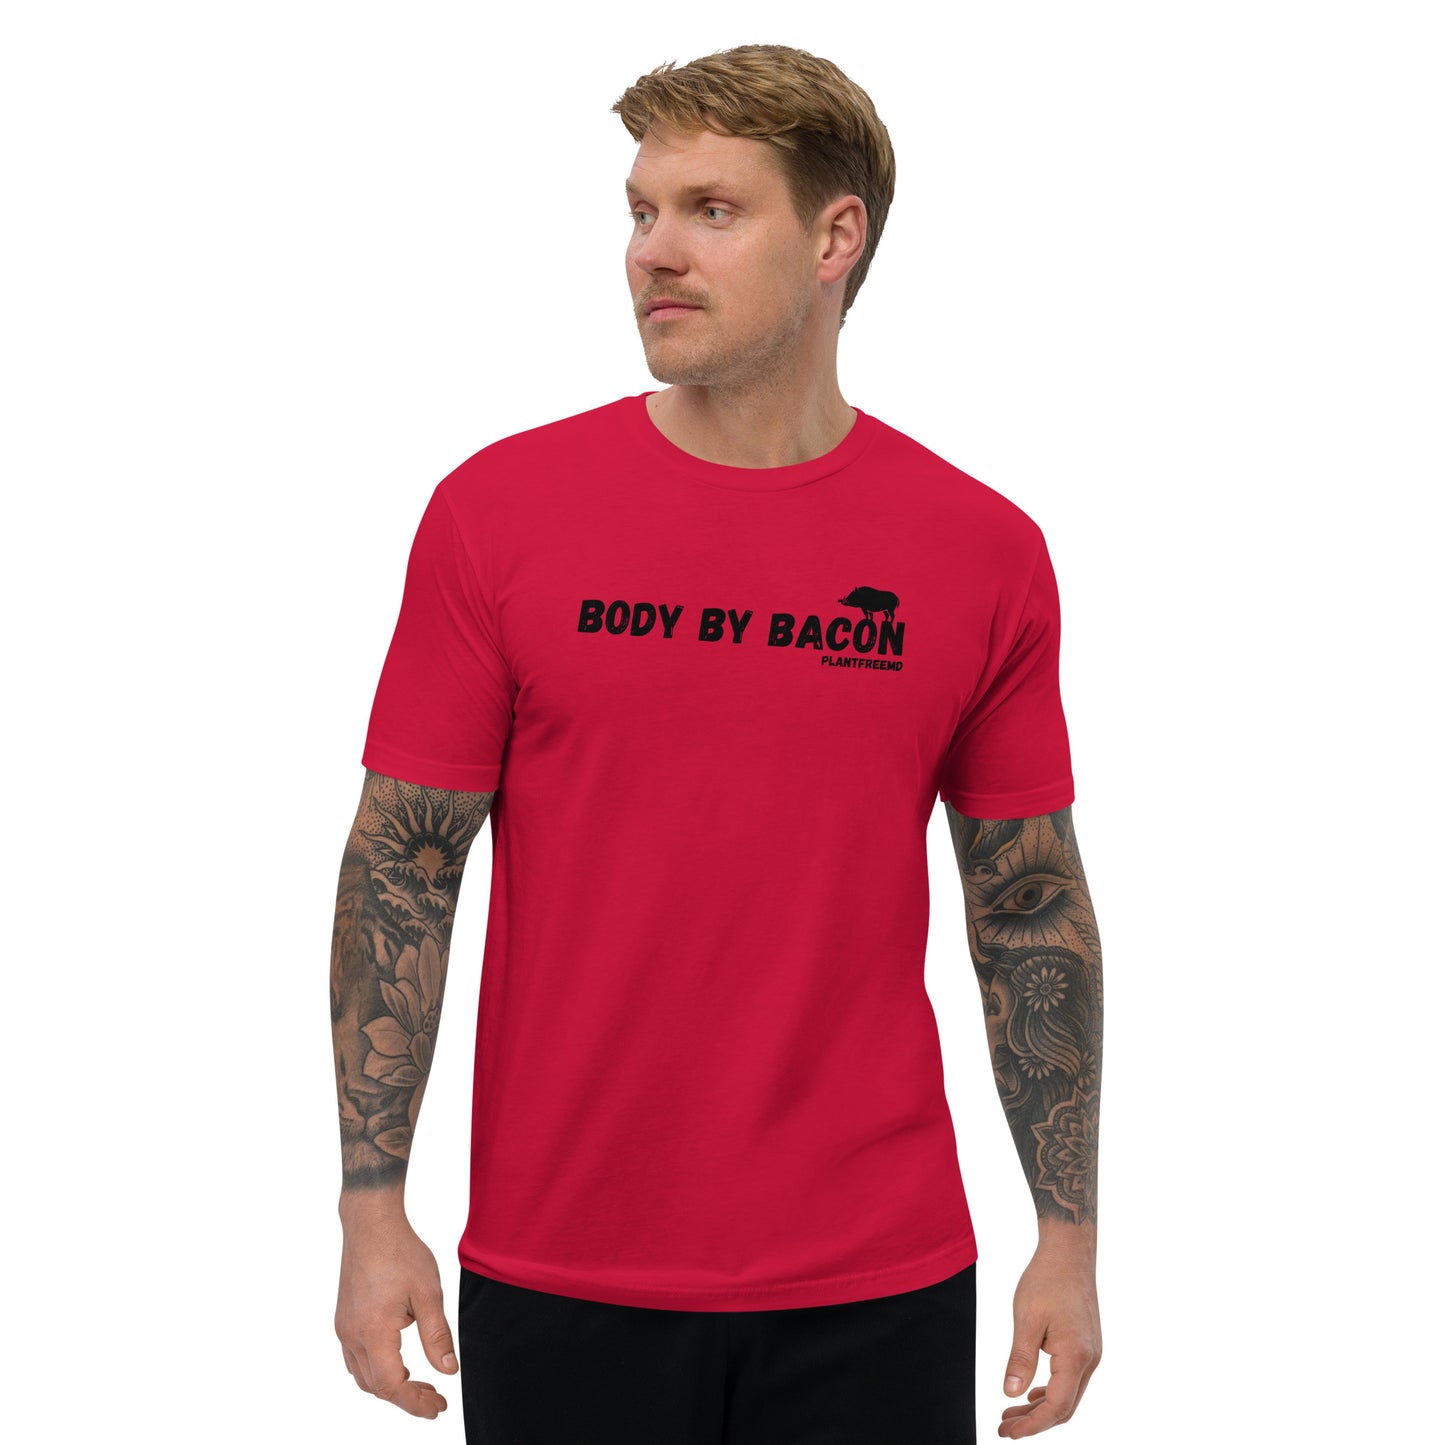 Body By Bacon Men's Fitted T-shirt